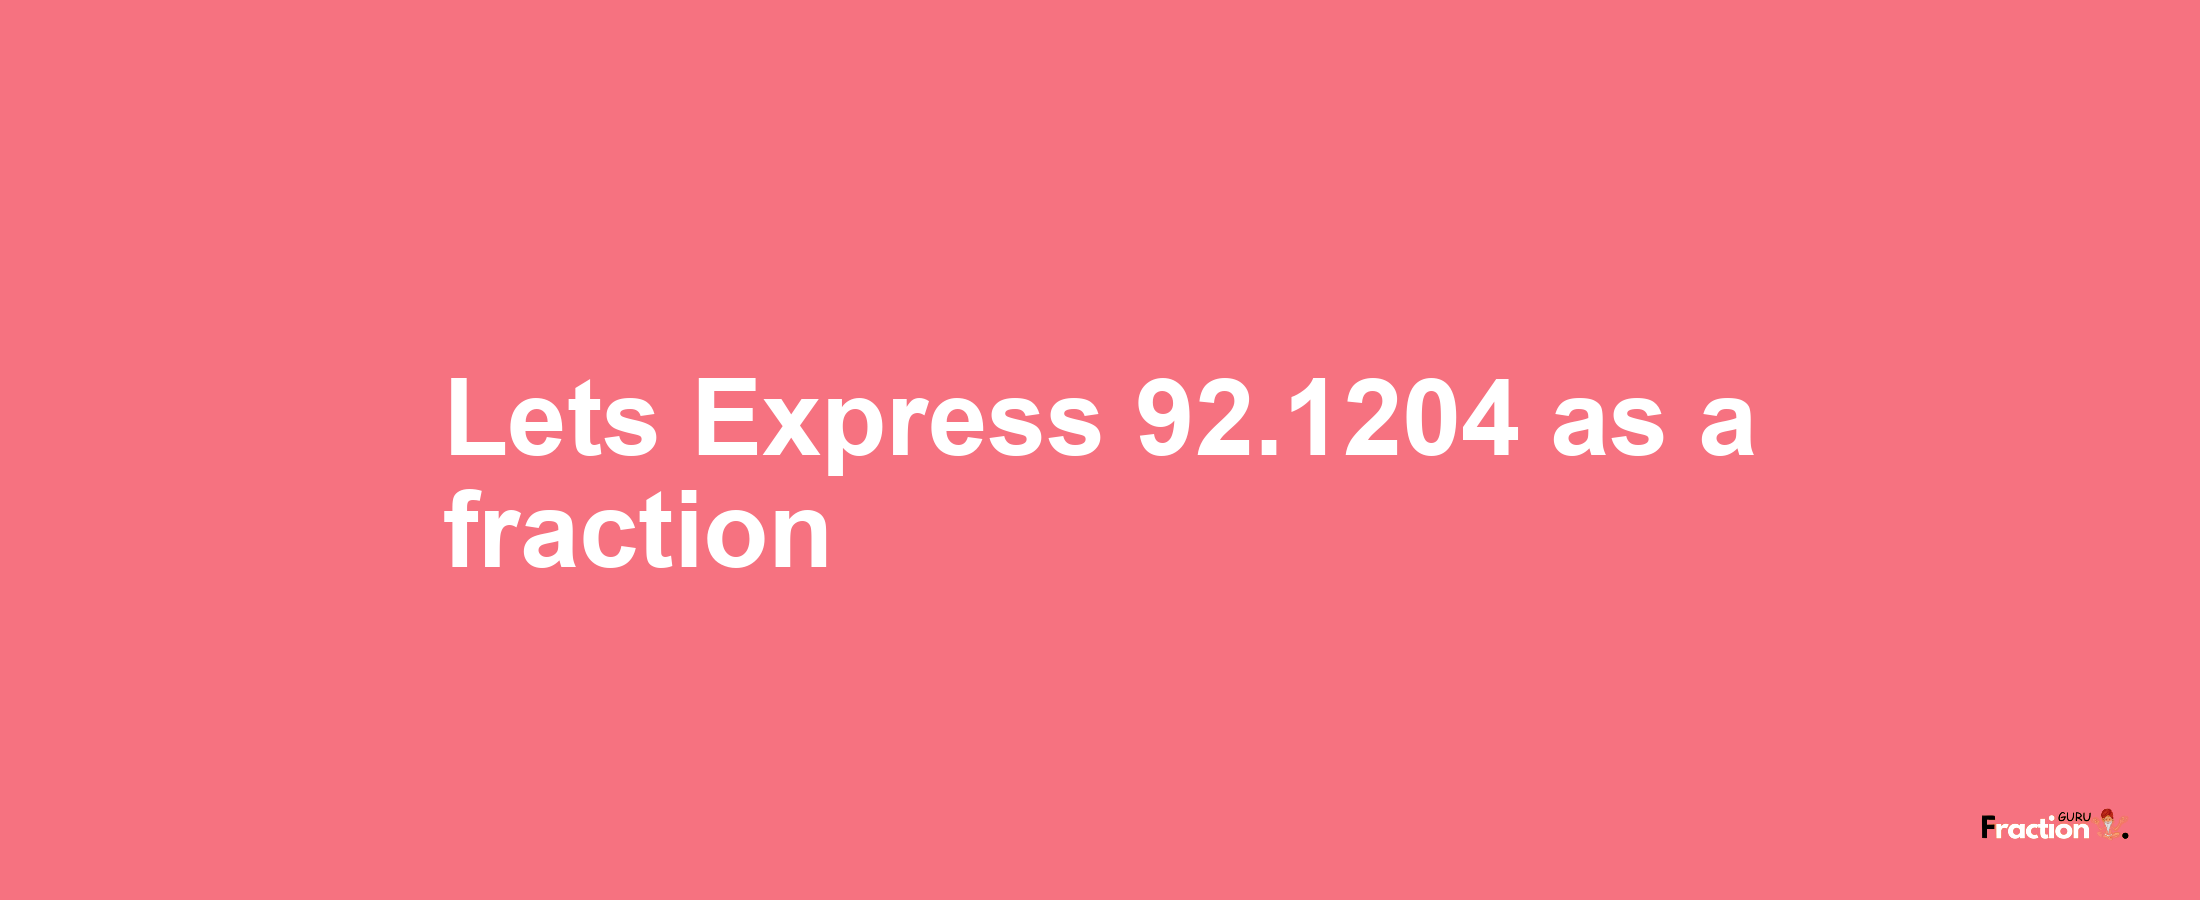 Lets Express 92.1204 as afraction